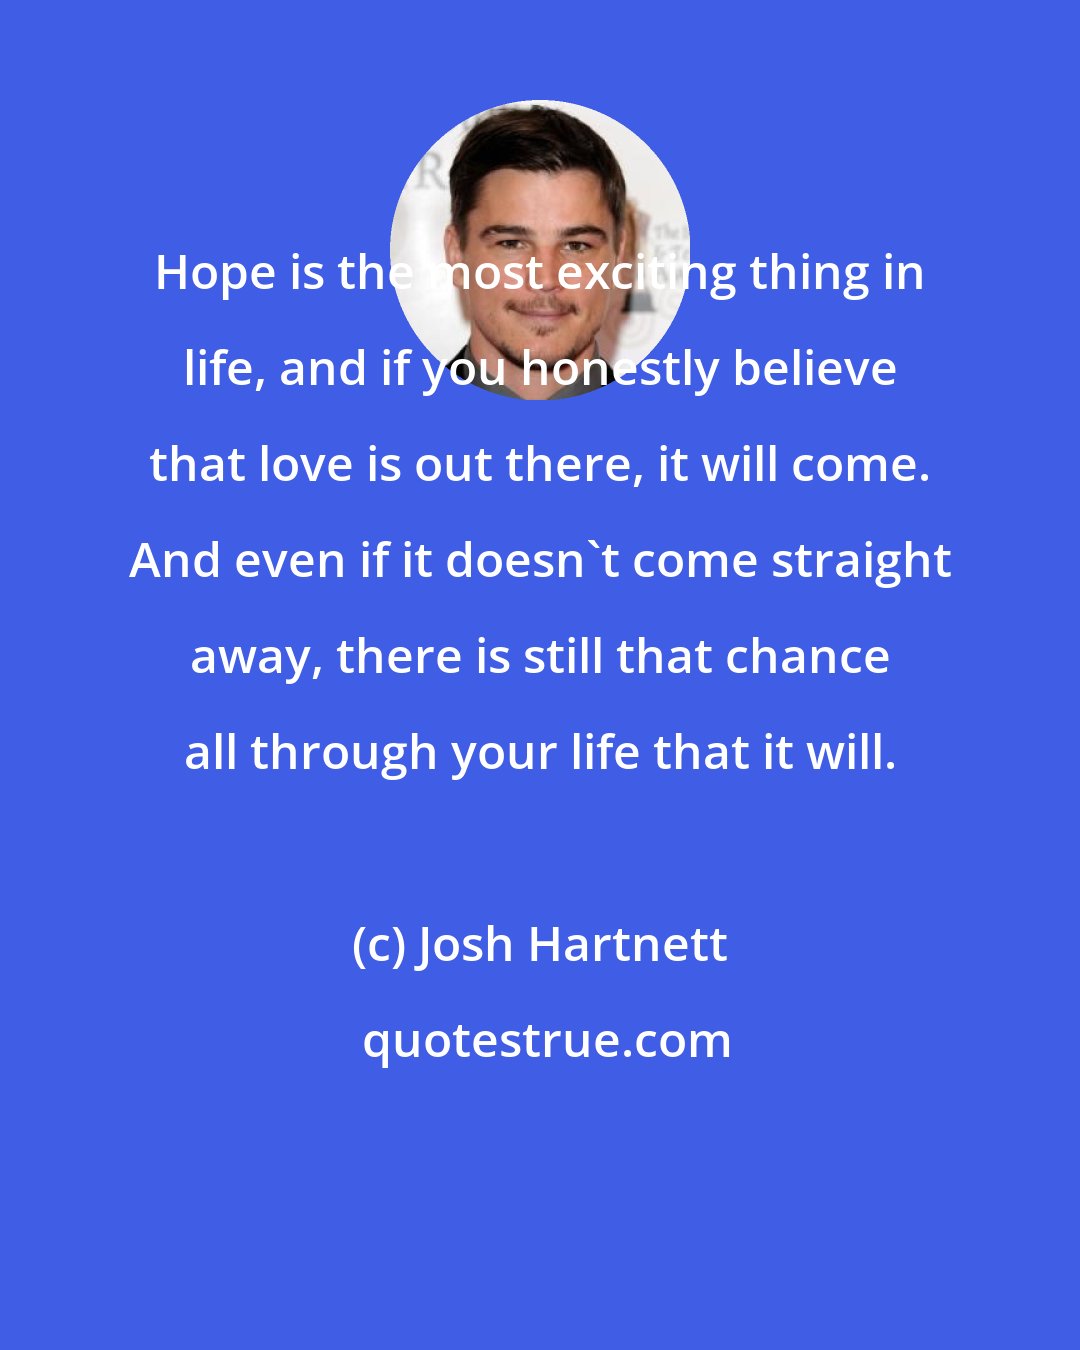 Josh Hartnett: Hope is the most exciting thing in life, and if you honestly believe that love is out there, it will come. And even if it doesn't come straight away, there is still that chance all through your life that it will.